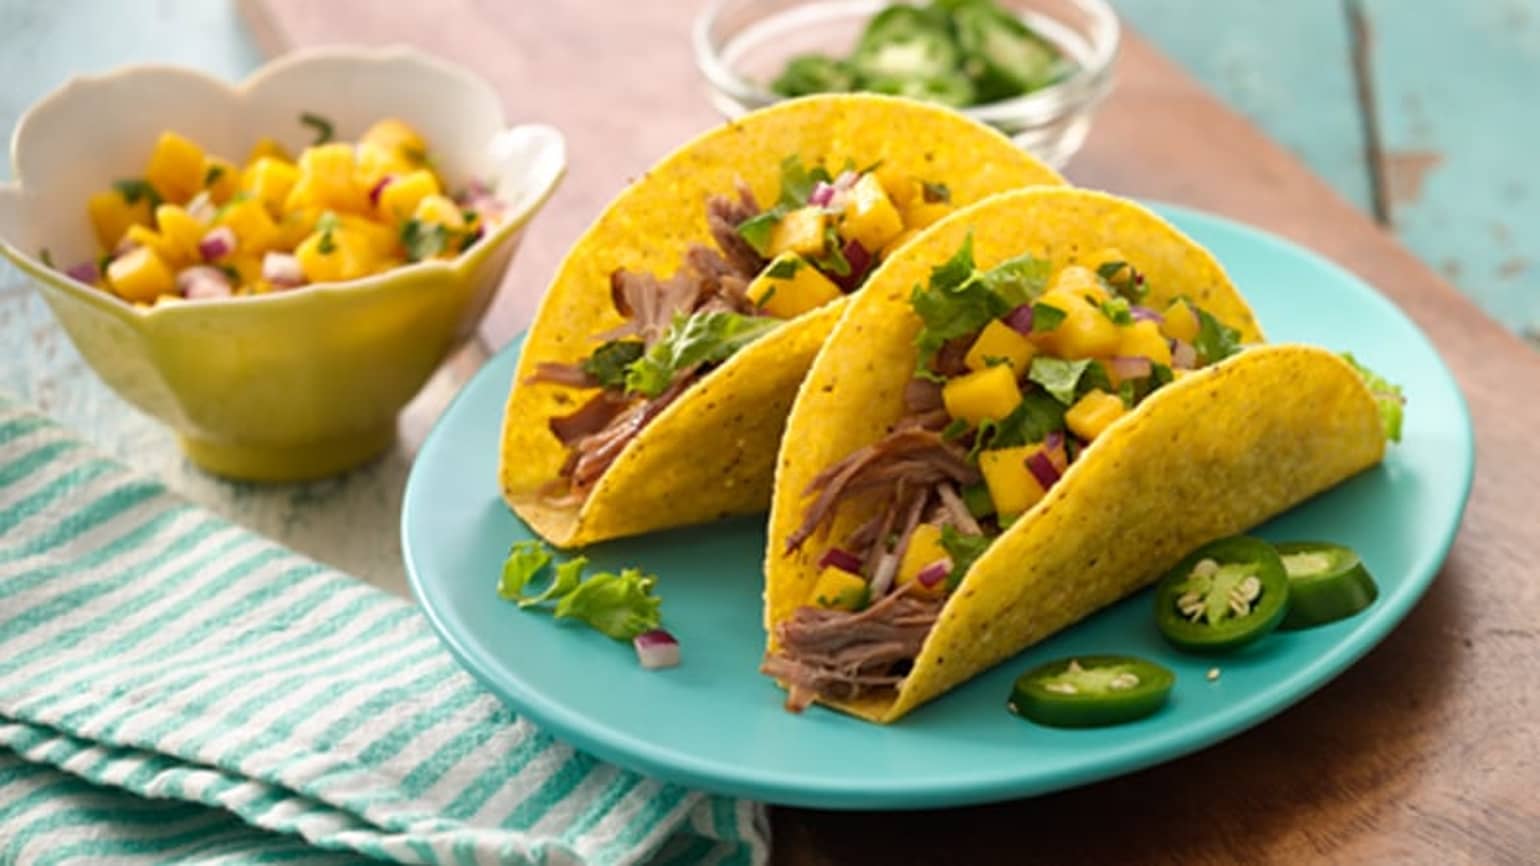 pulled pork tacos with mango salsa